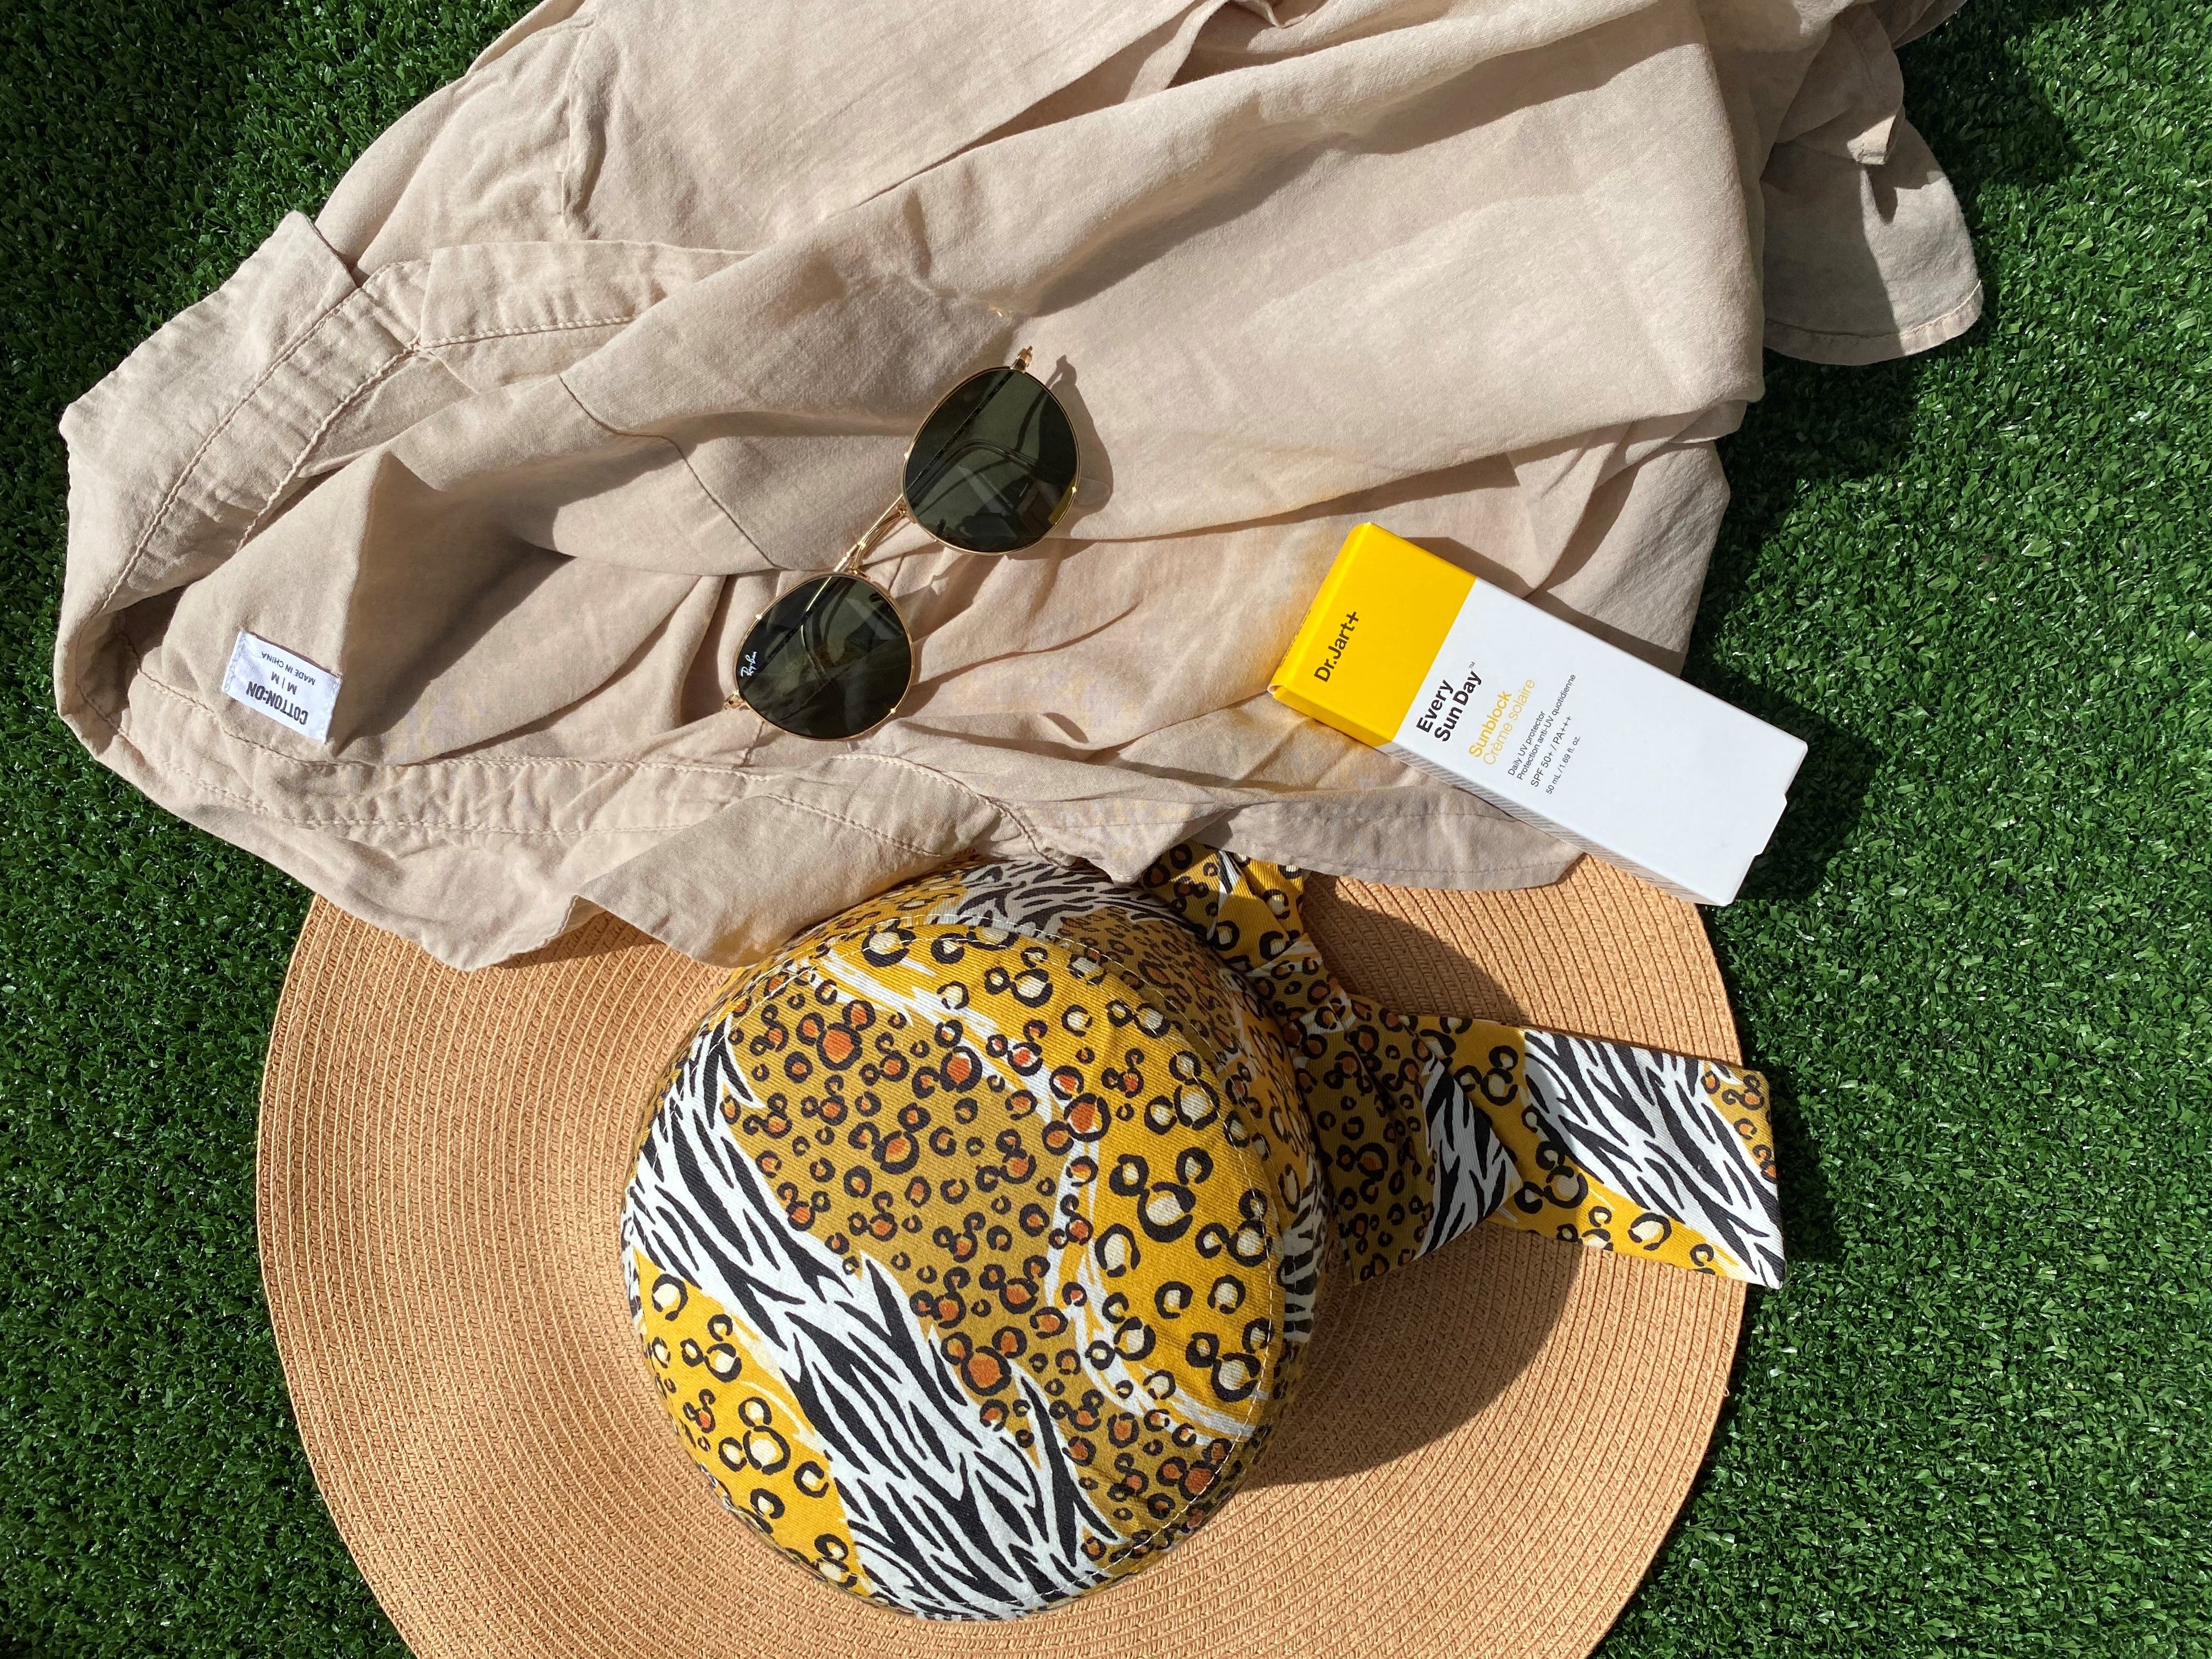 HI-REVIEW: Dr Jart+ Every Sun Day Sunblock SPF50+ PA+++